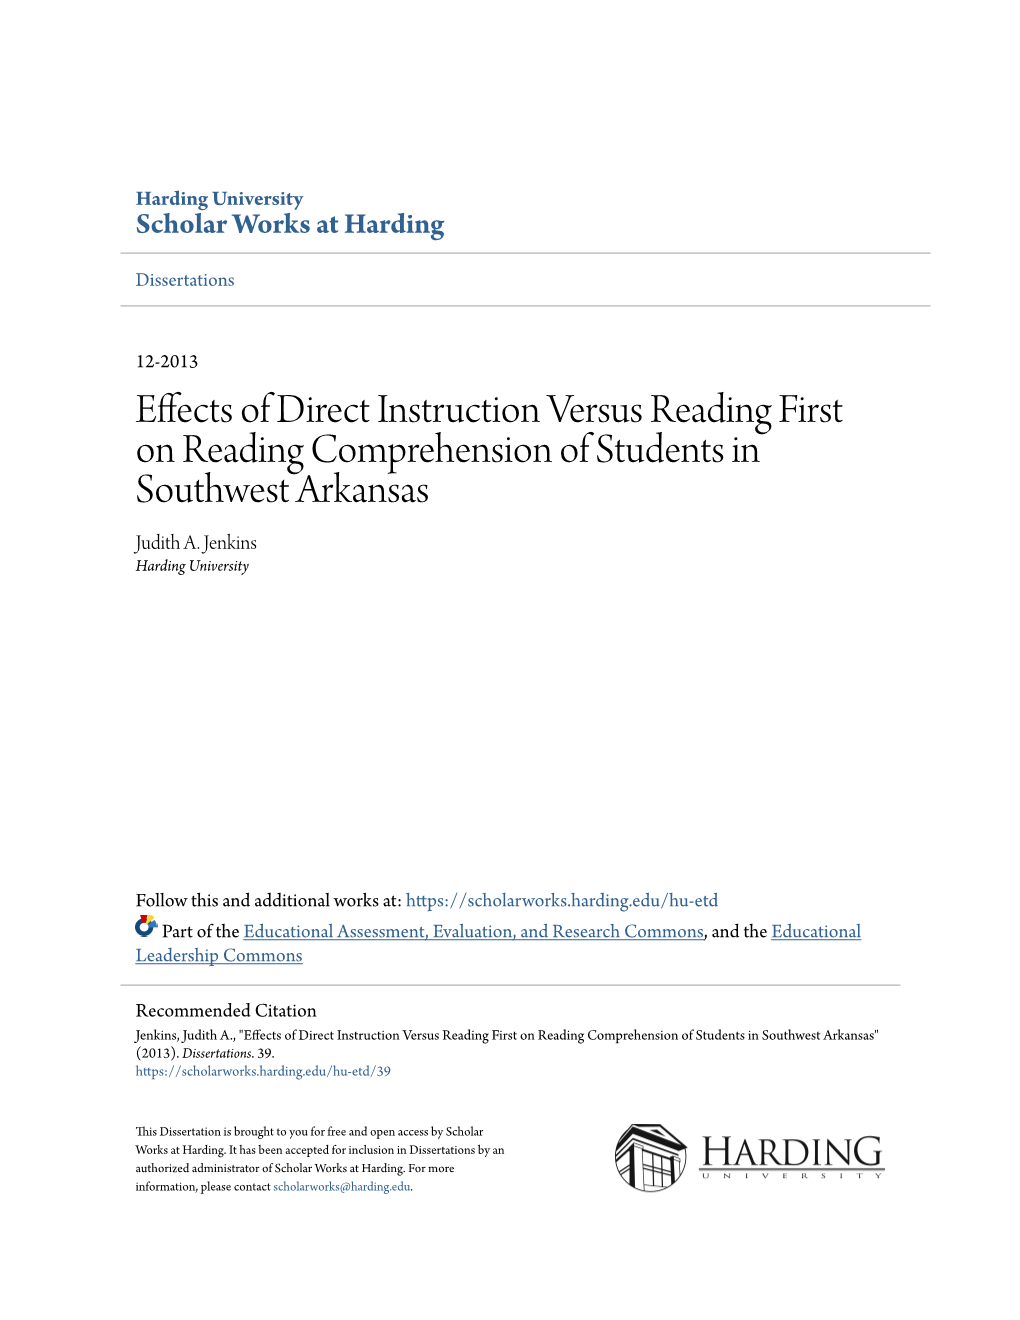 Effects of Direct Instruction Versus Reading First on Reading Comprehension of Students in Southwest Arkansas Judith A